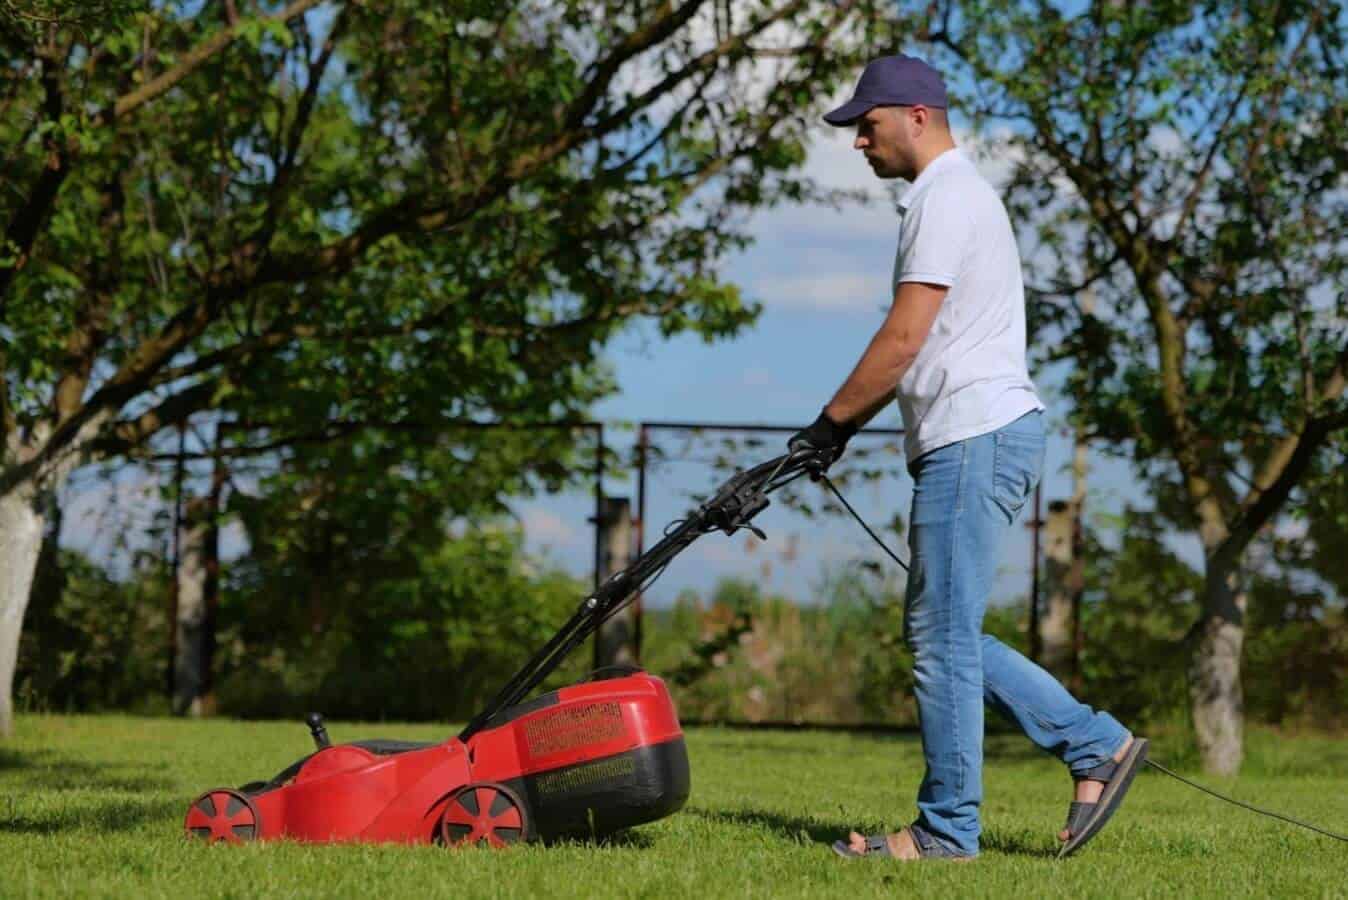 Sound Advice: Protecting Your Hearing During Yard Work